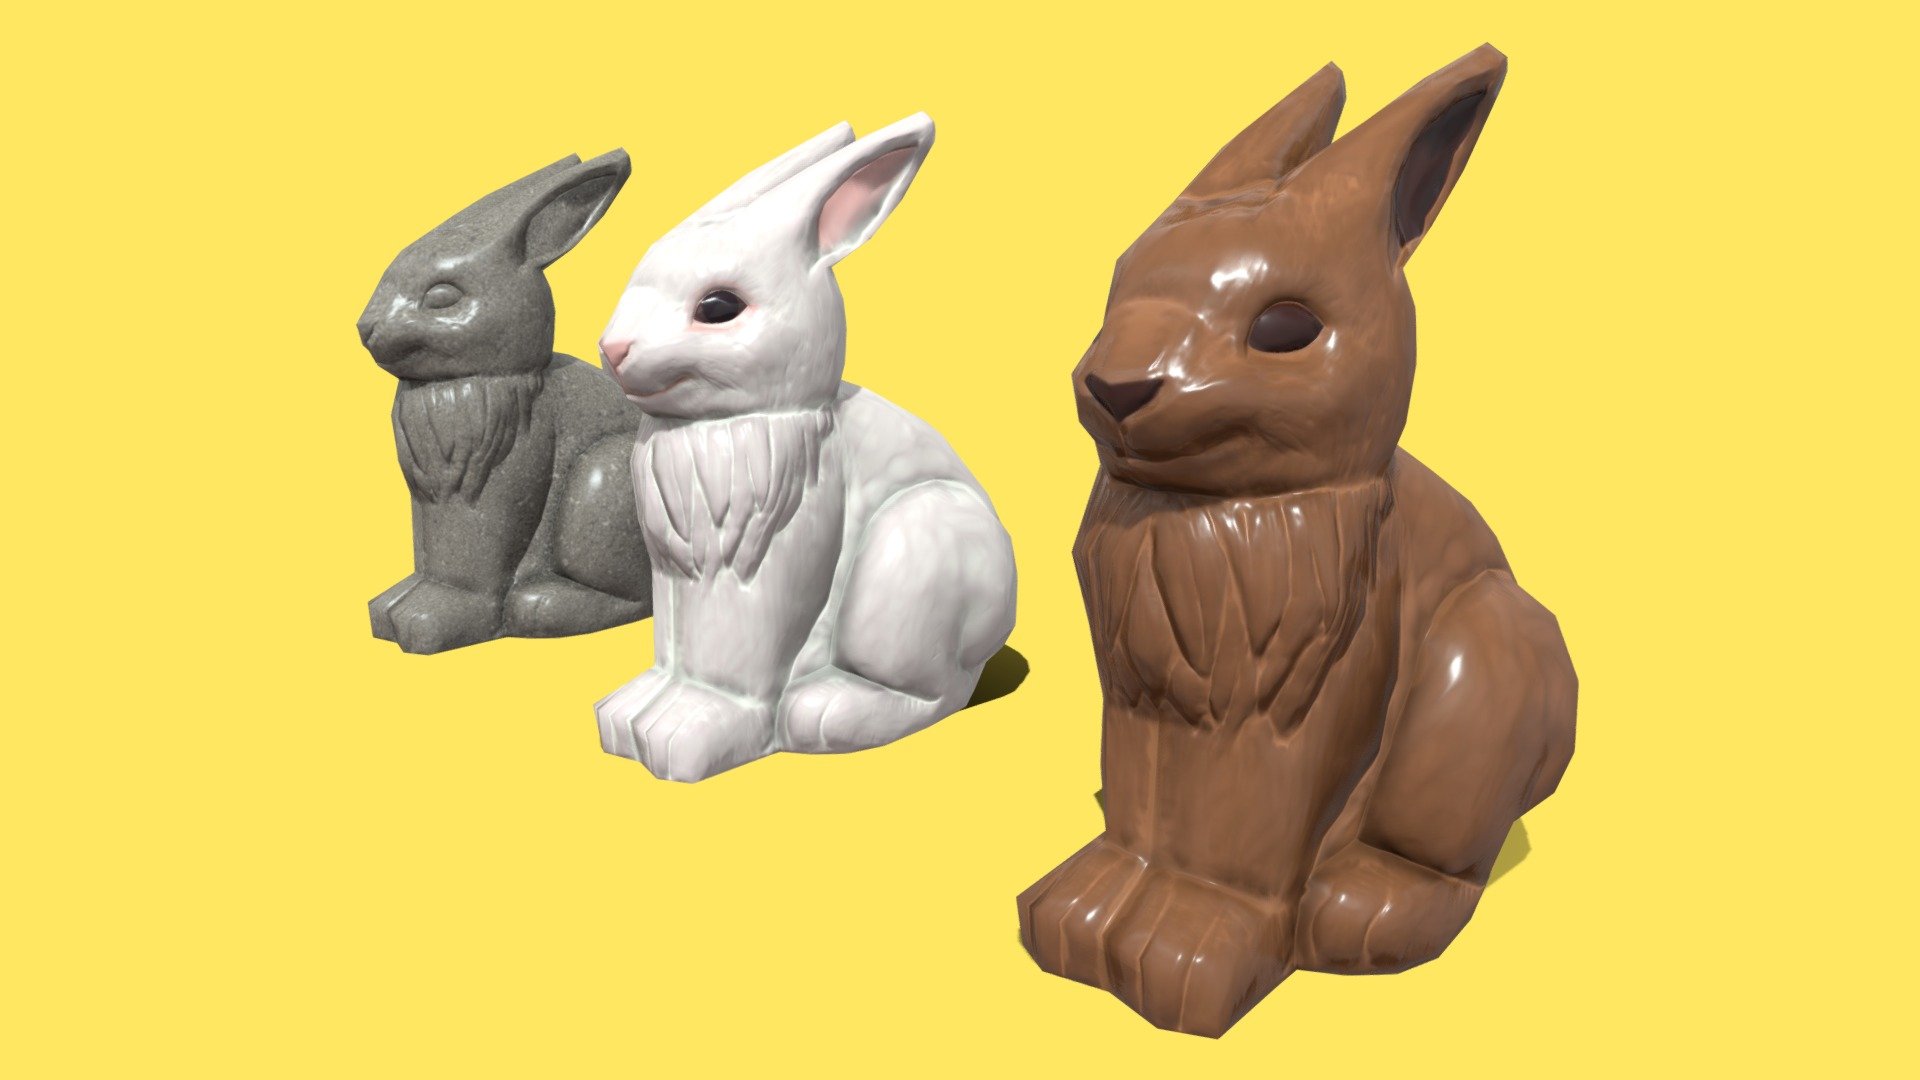 If you need additional work done do not hesitate to contact me, I am currently available for freelance work.

Stylized rabbit statue out of stone, plastic and chocolate for a blossoming spring garden or easter basket. Decoration for a game or an event for easter and bunny day.

374 Vertices per bunny.

Highpoly sculpted in Nomadsculpt. Lowpoly made in Blender
Highpoly and Lowpoly-model are in a Blend-file included in additional file with embedded materials.
Model and Concept by Me, Enya Gerber 3d model